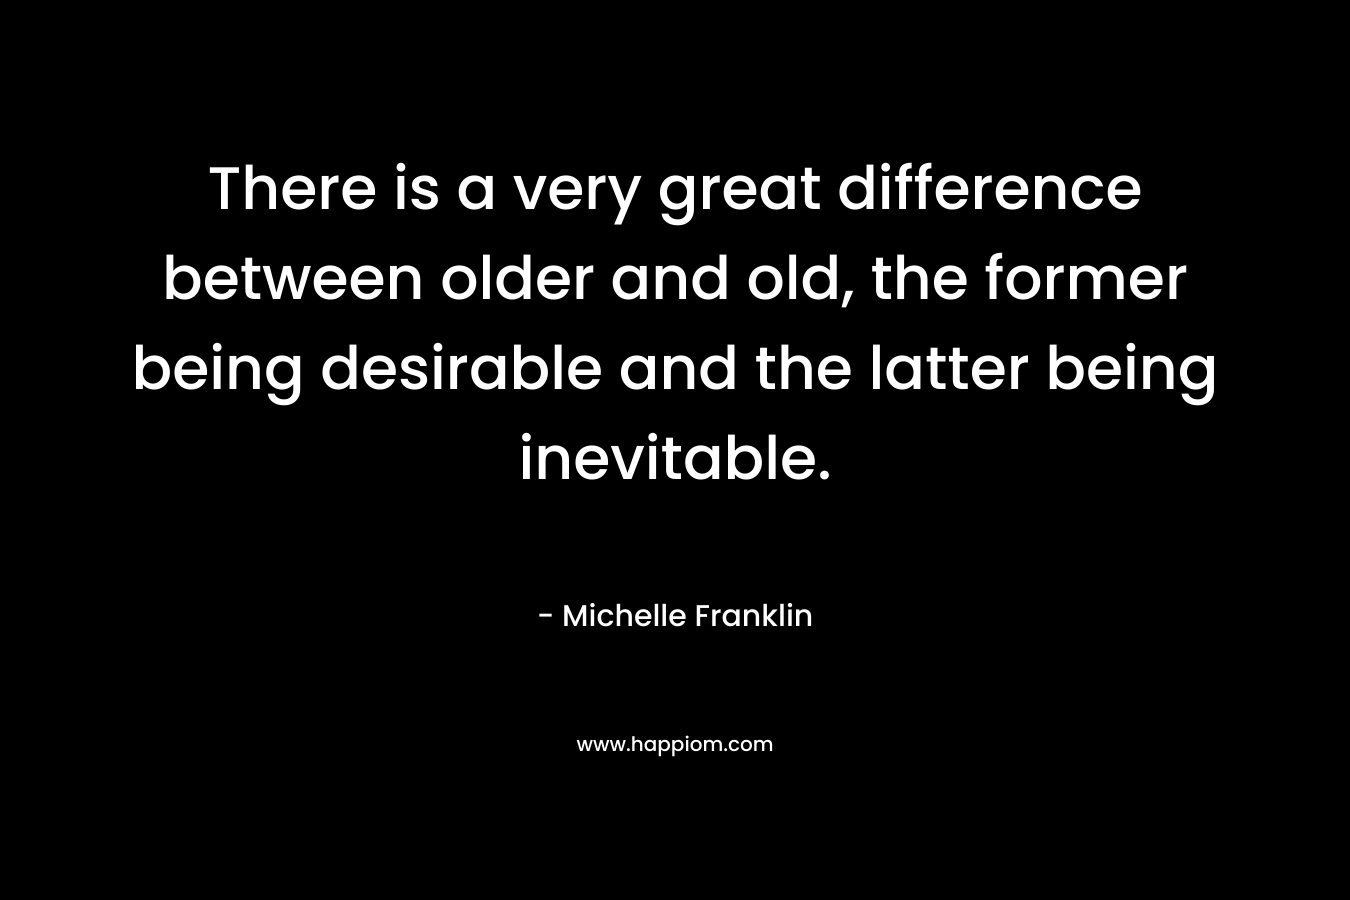 There is a very great difference between older and old, the former being desirable and the latter being inevitable.